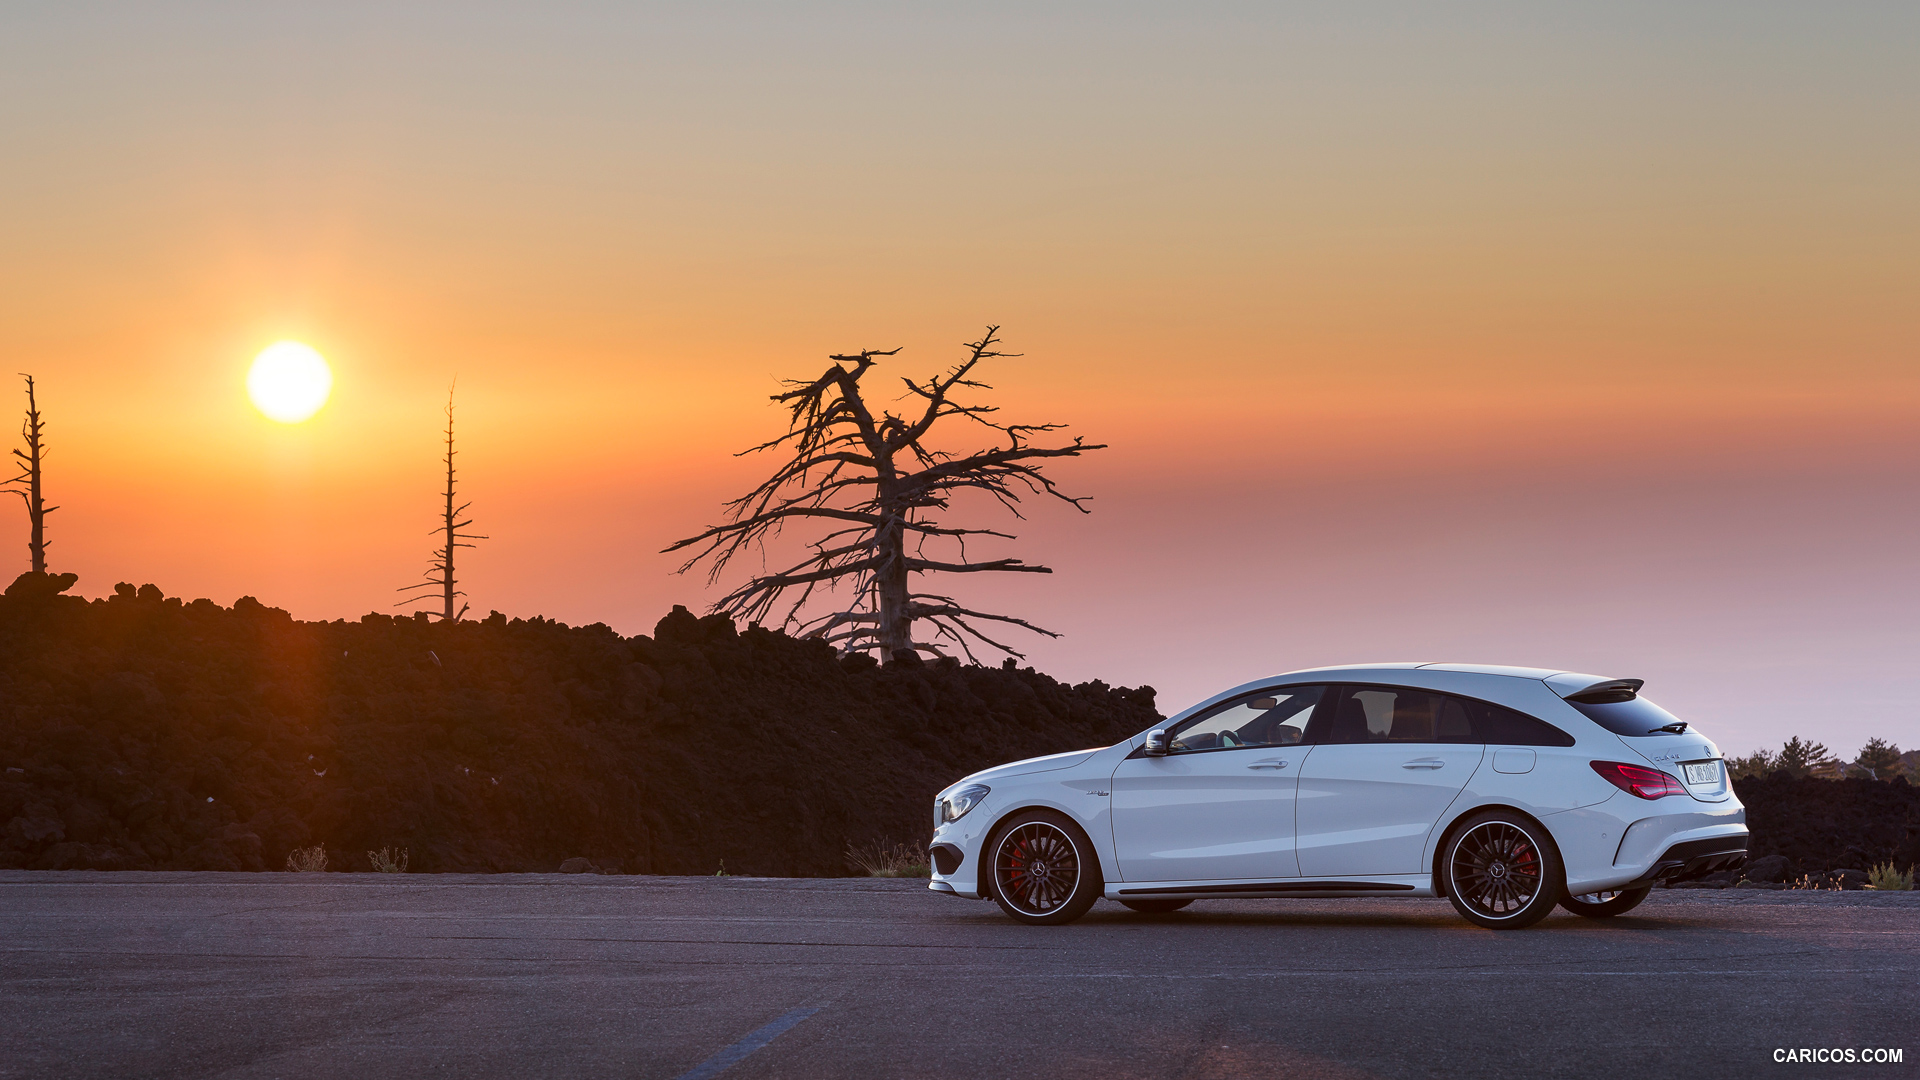 2015 Mercedes-Benz CLA 45 AMG Shooting Brake (Calcite White) - Side, #24 of 70